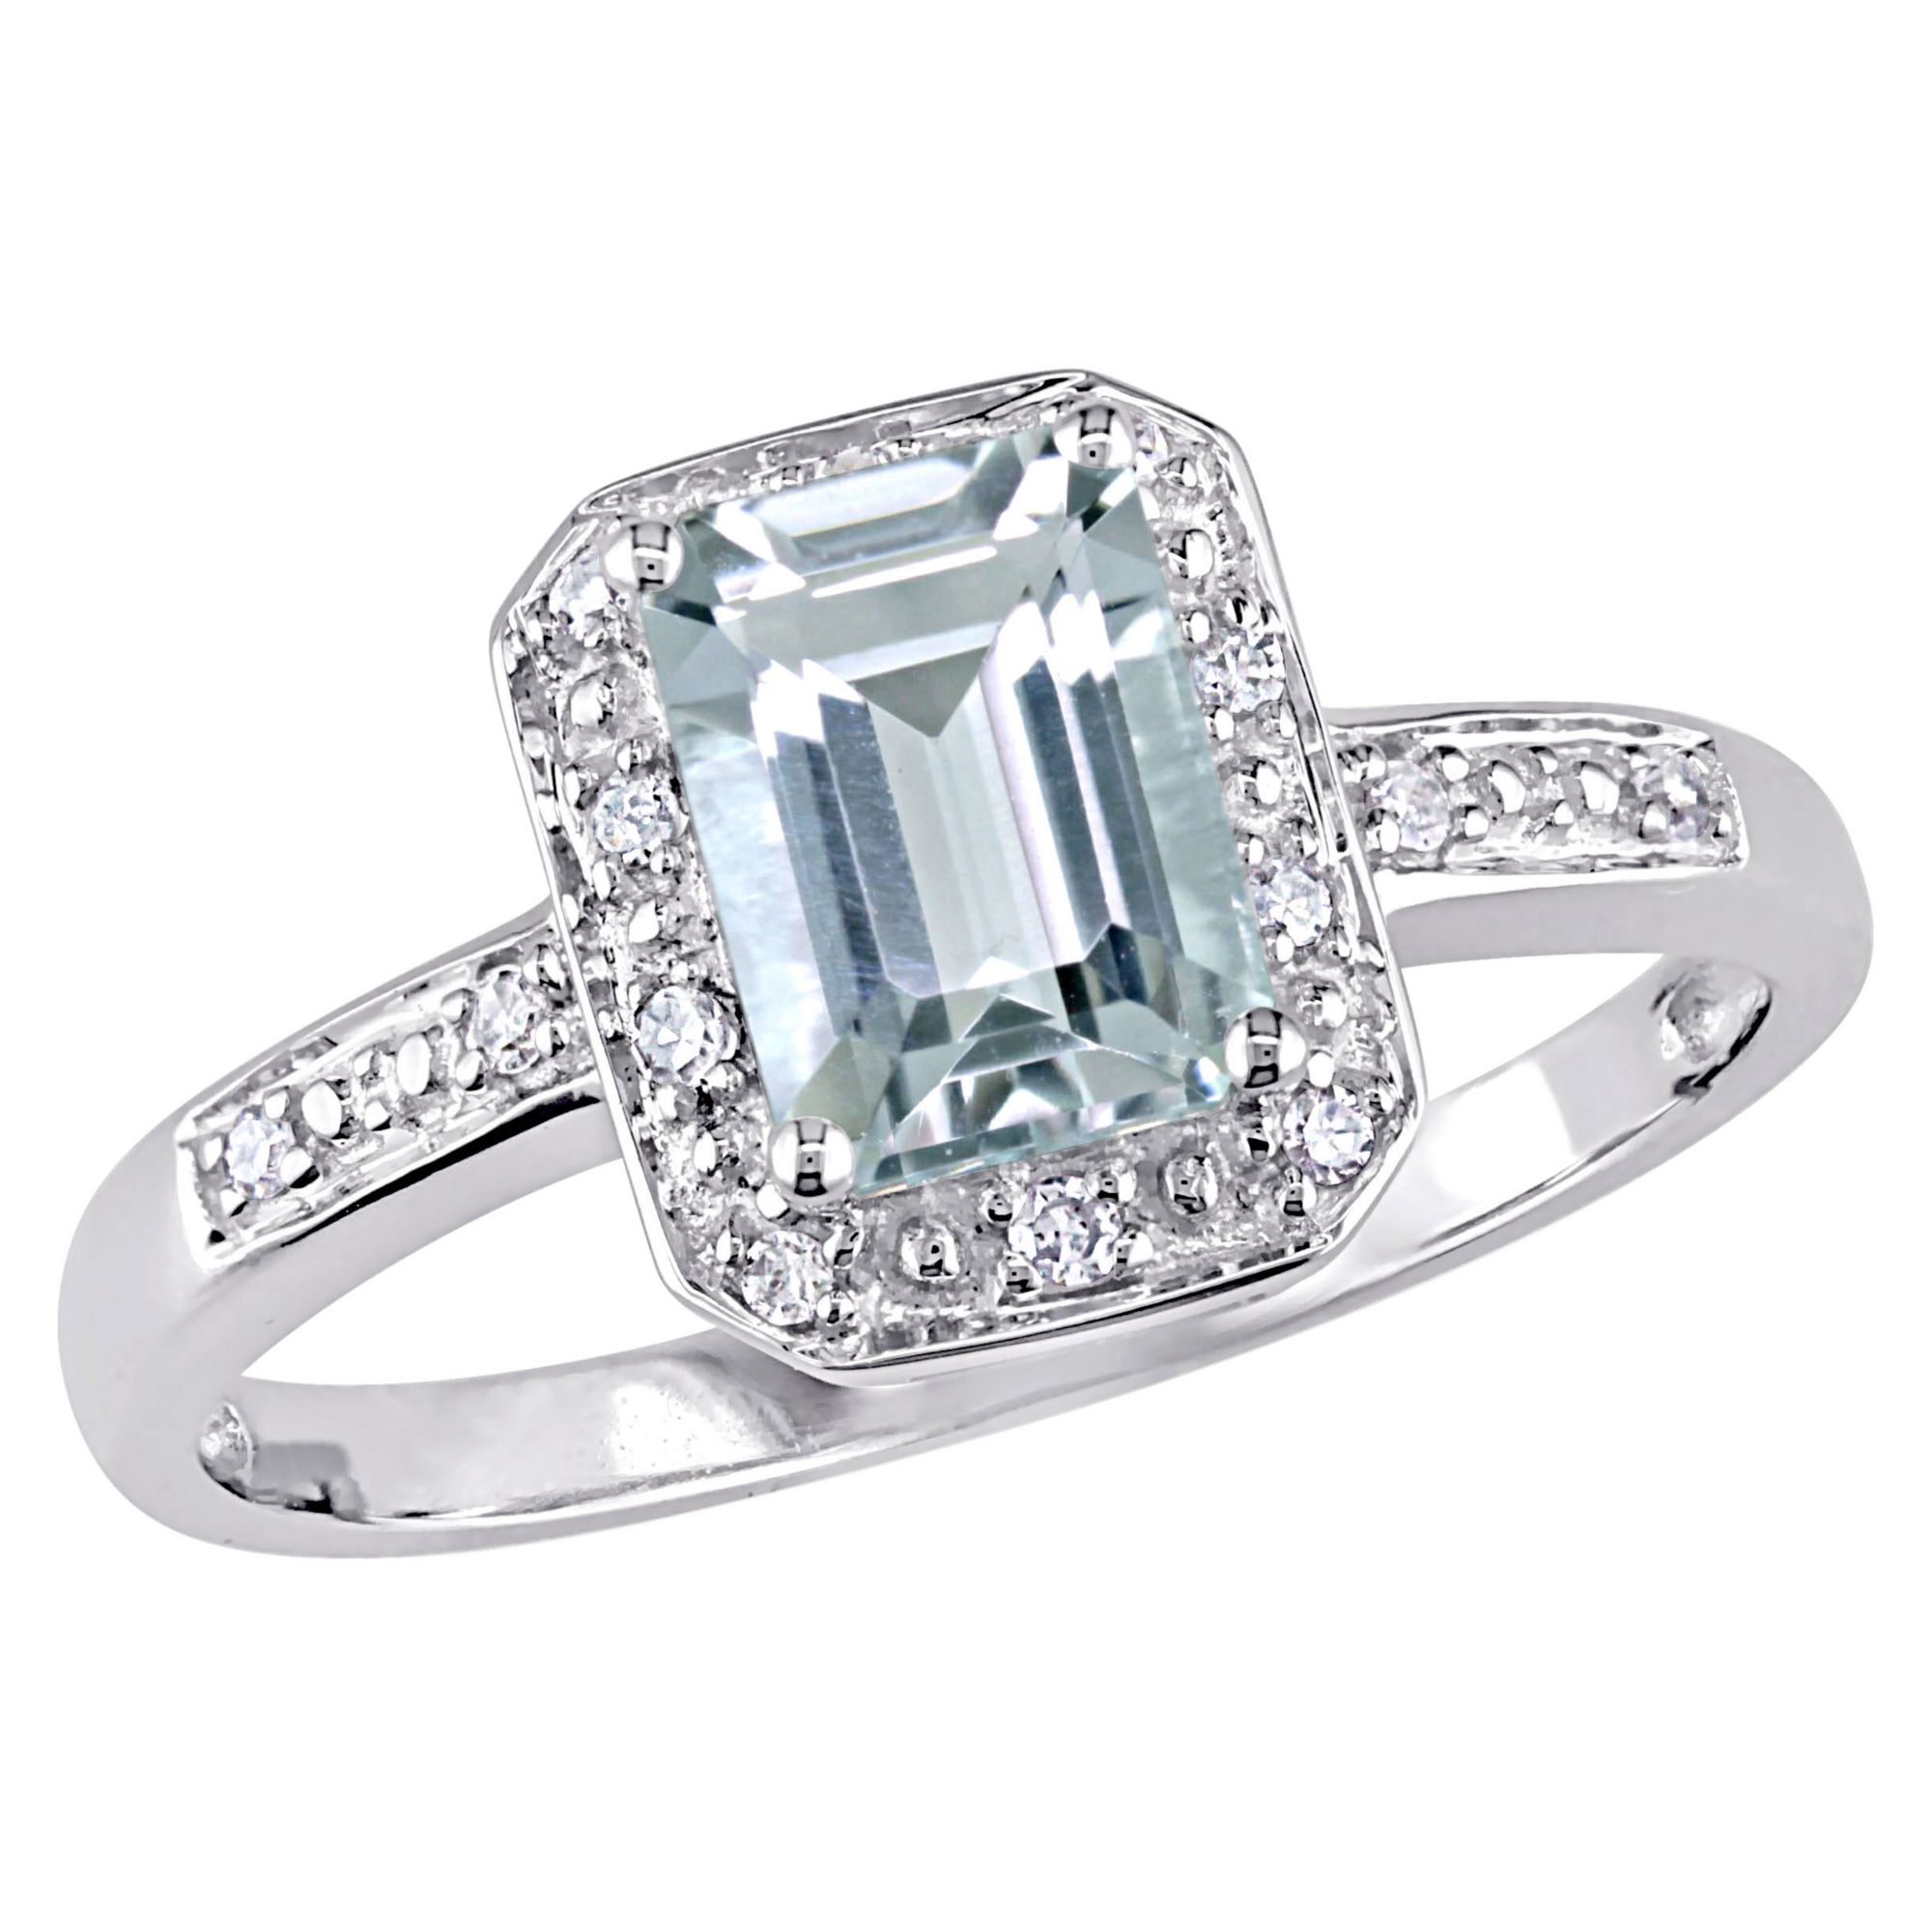 1 ct. t.g.w. Aquamarine and Diamond Accent Halo Ring in 10k White Gold, Size 10